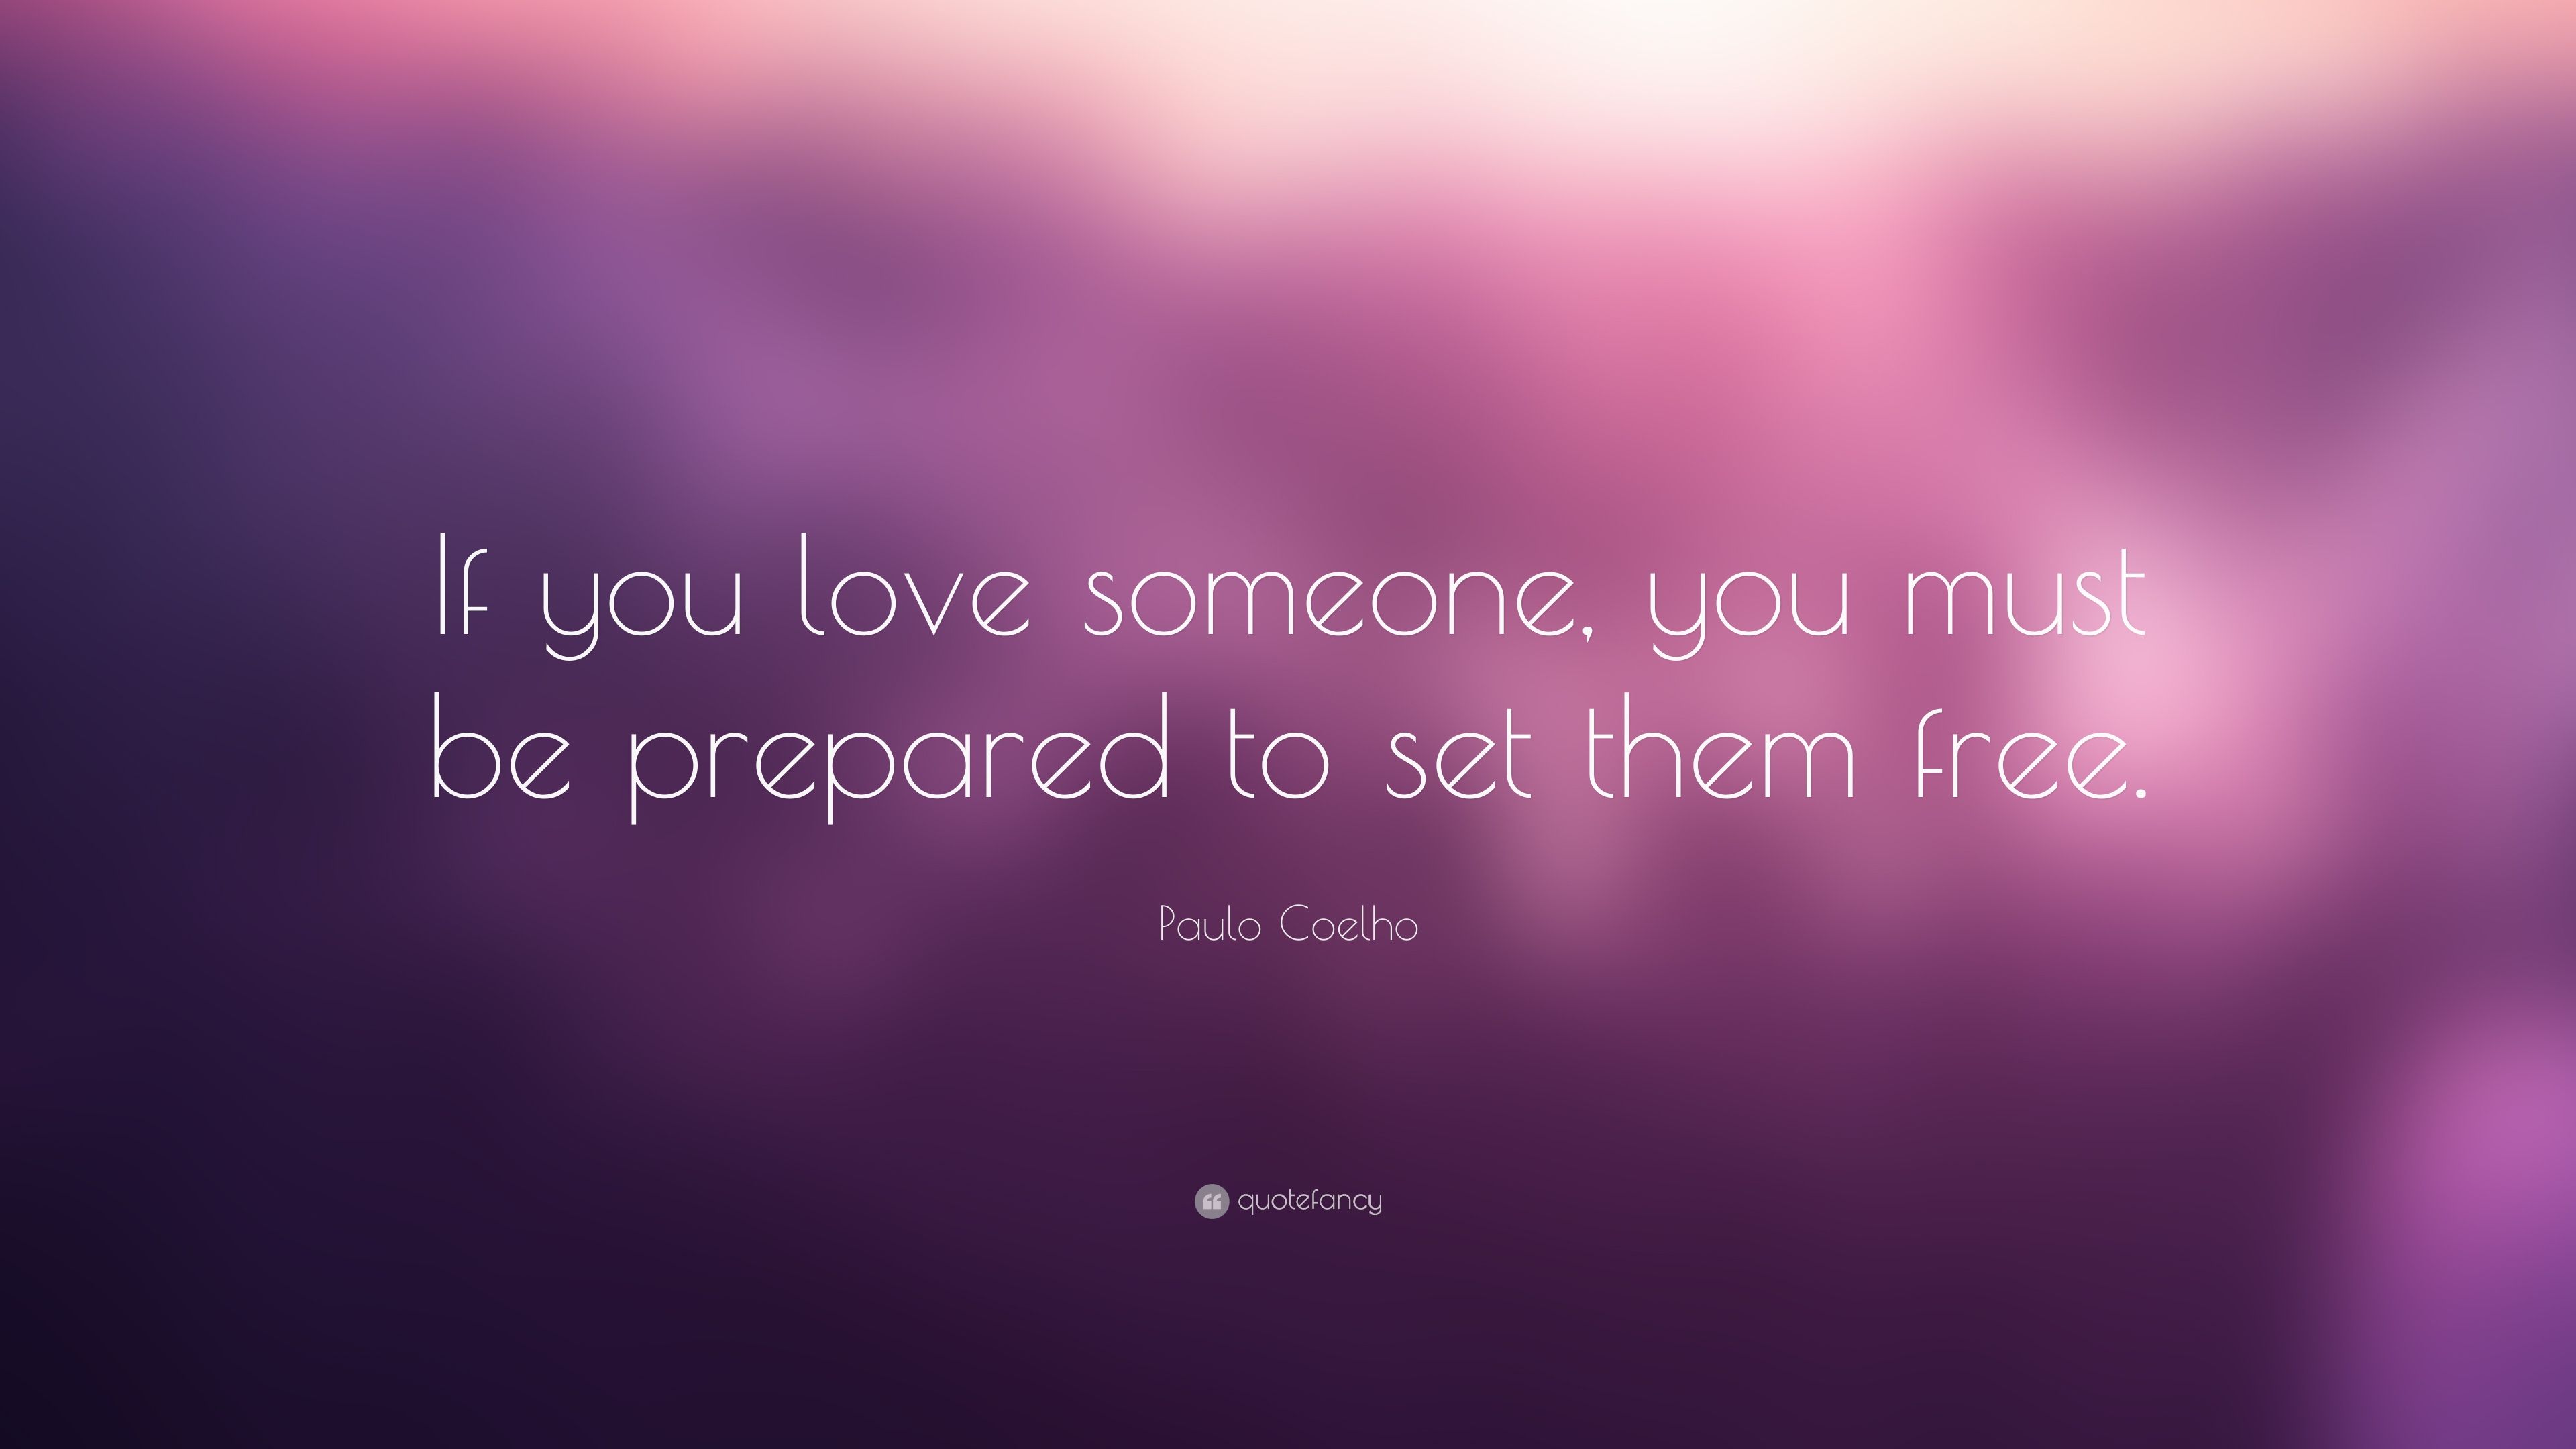 Paulo Coelho Quote: “If you love someone, you must be prepared to